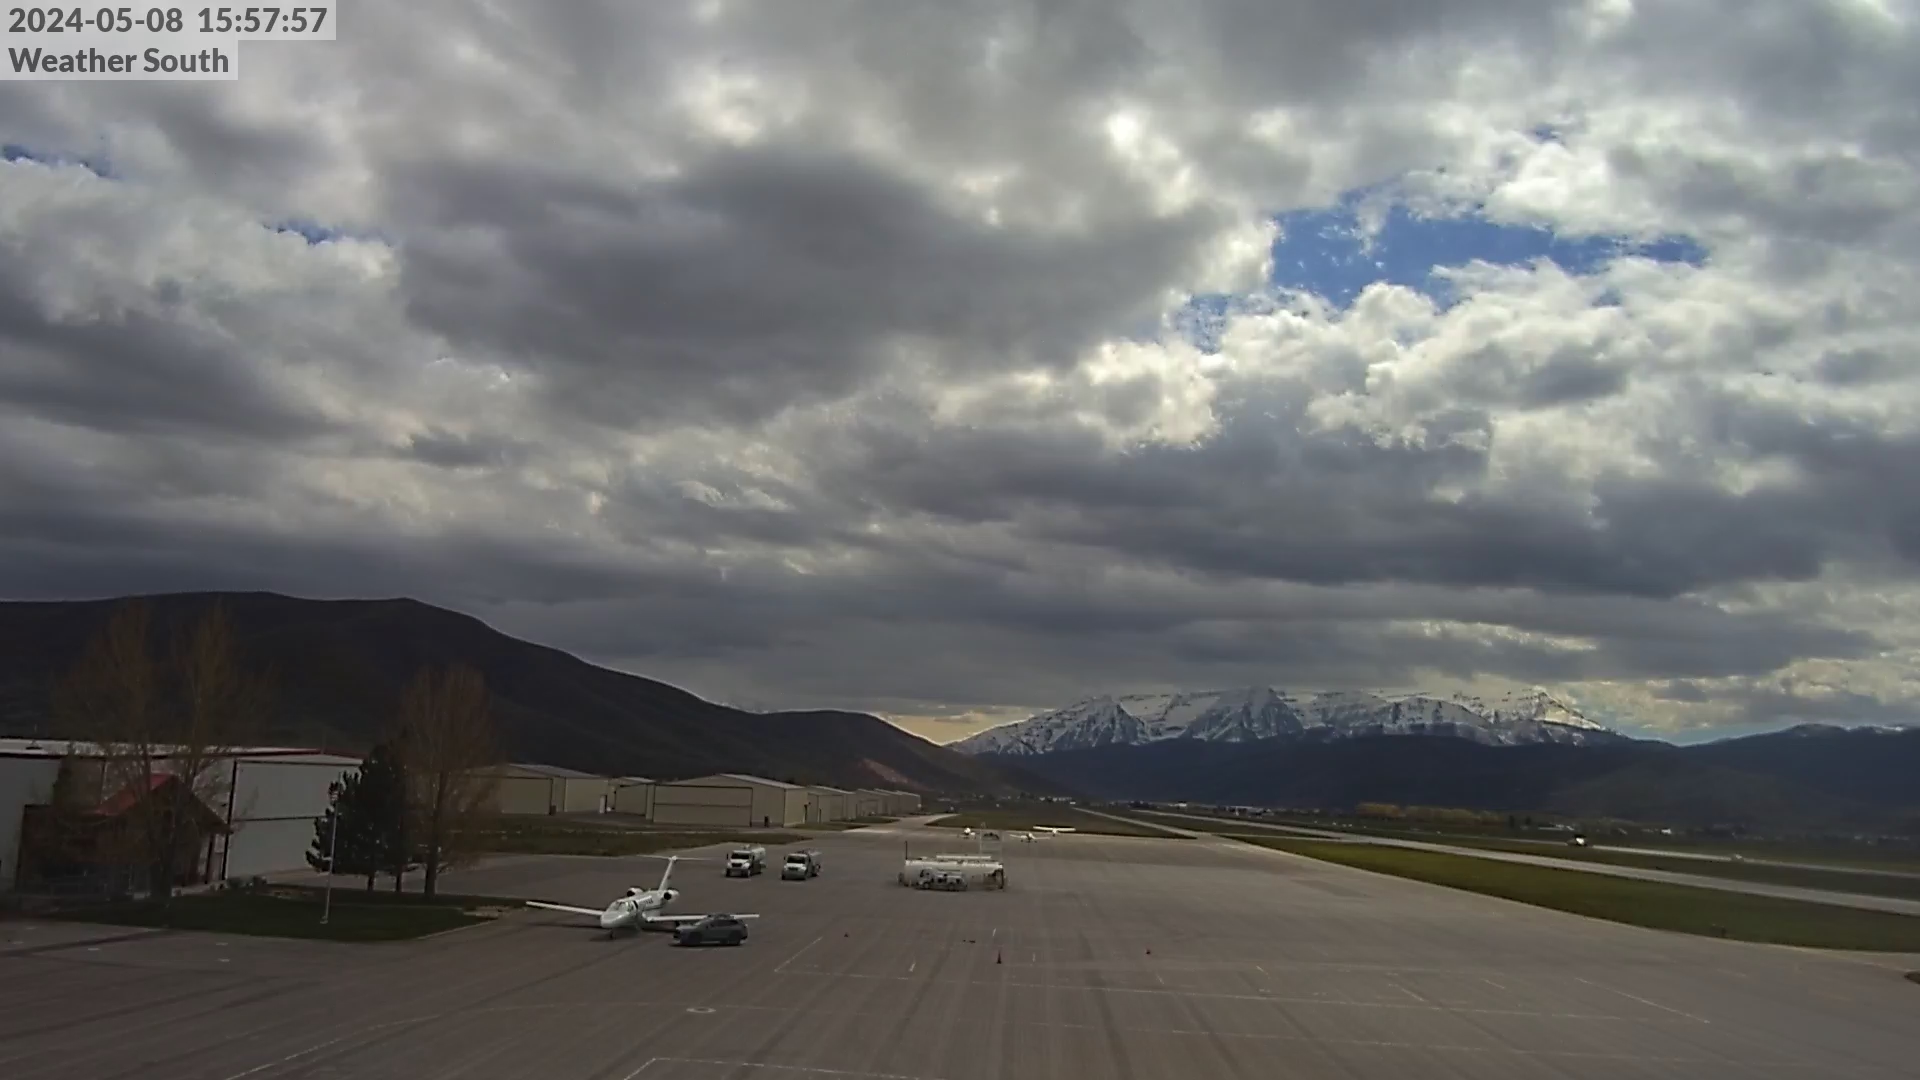 Weather South View, Real Time Airport Camera